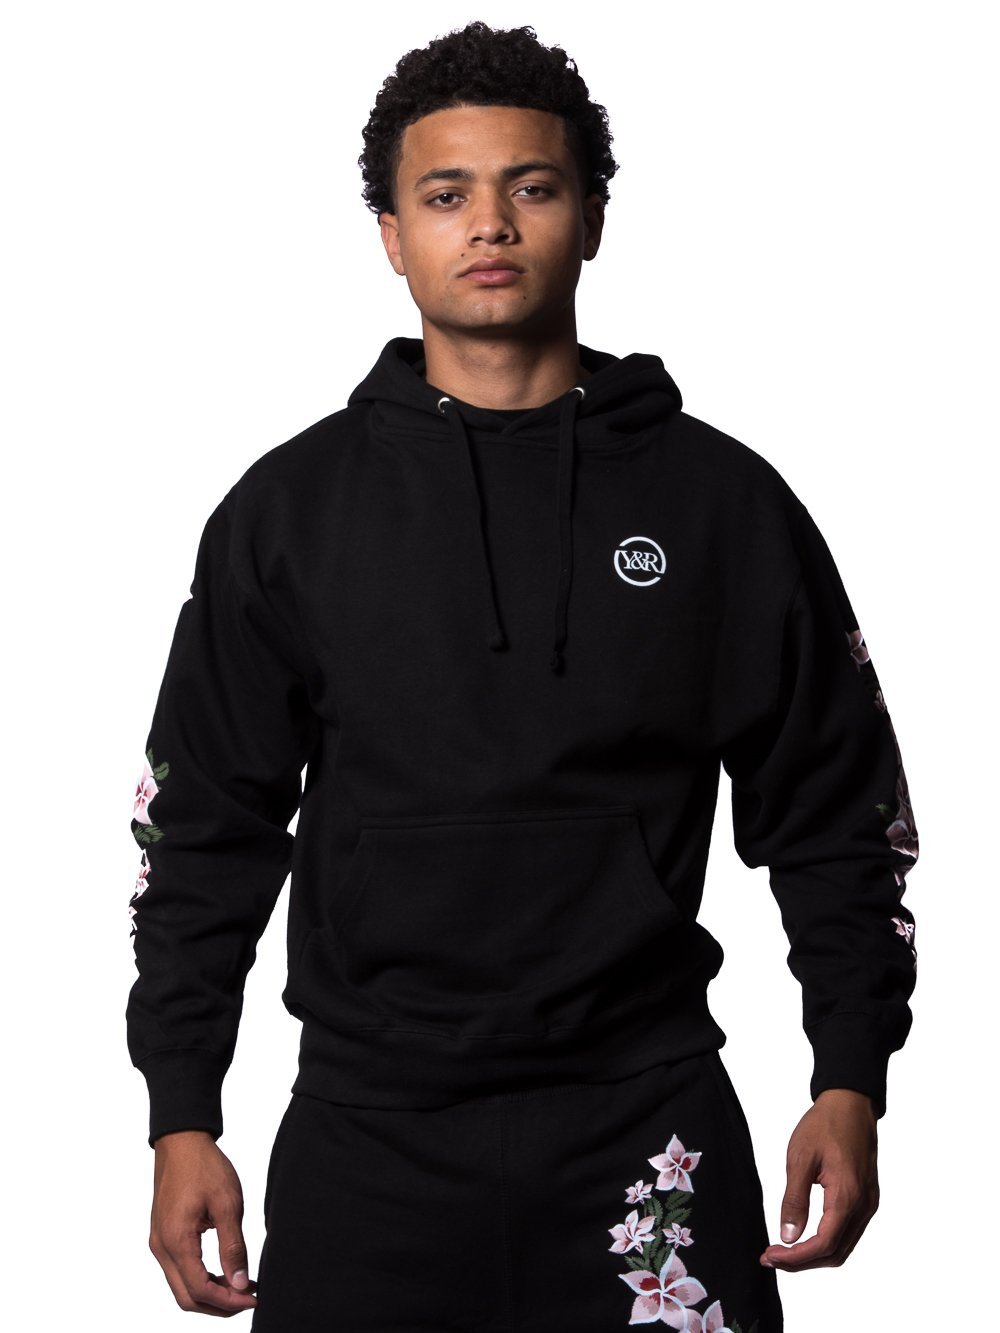 Orchid Hoodie - Black - Young & Reckless